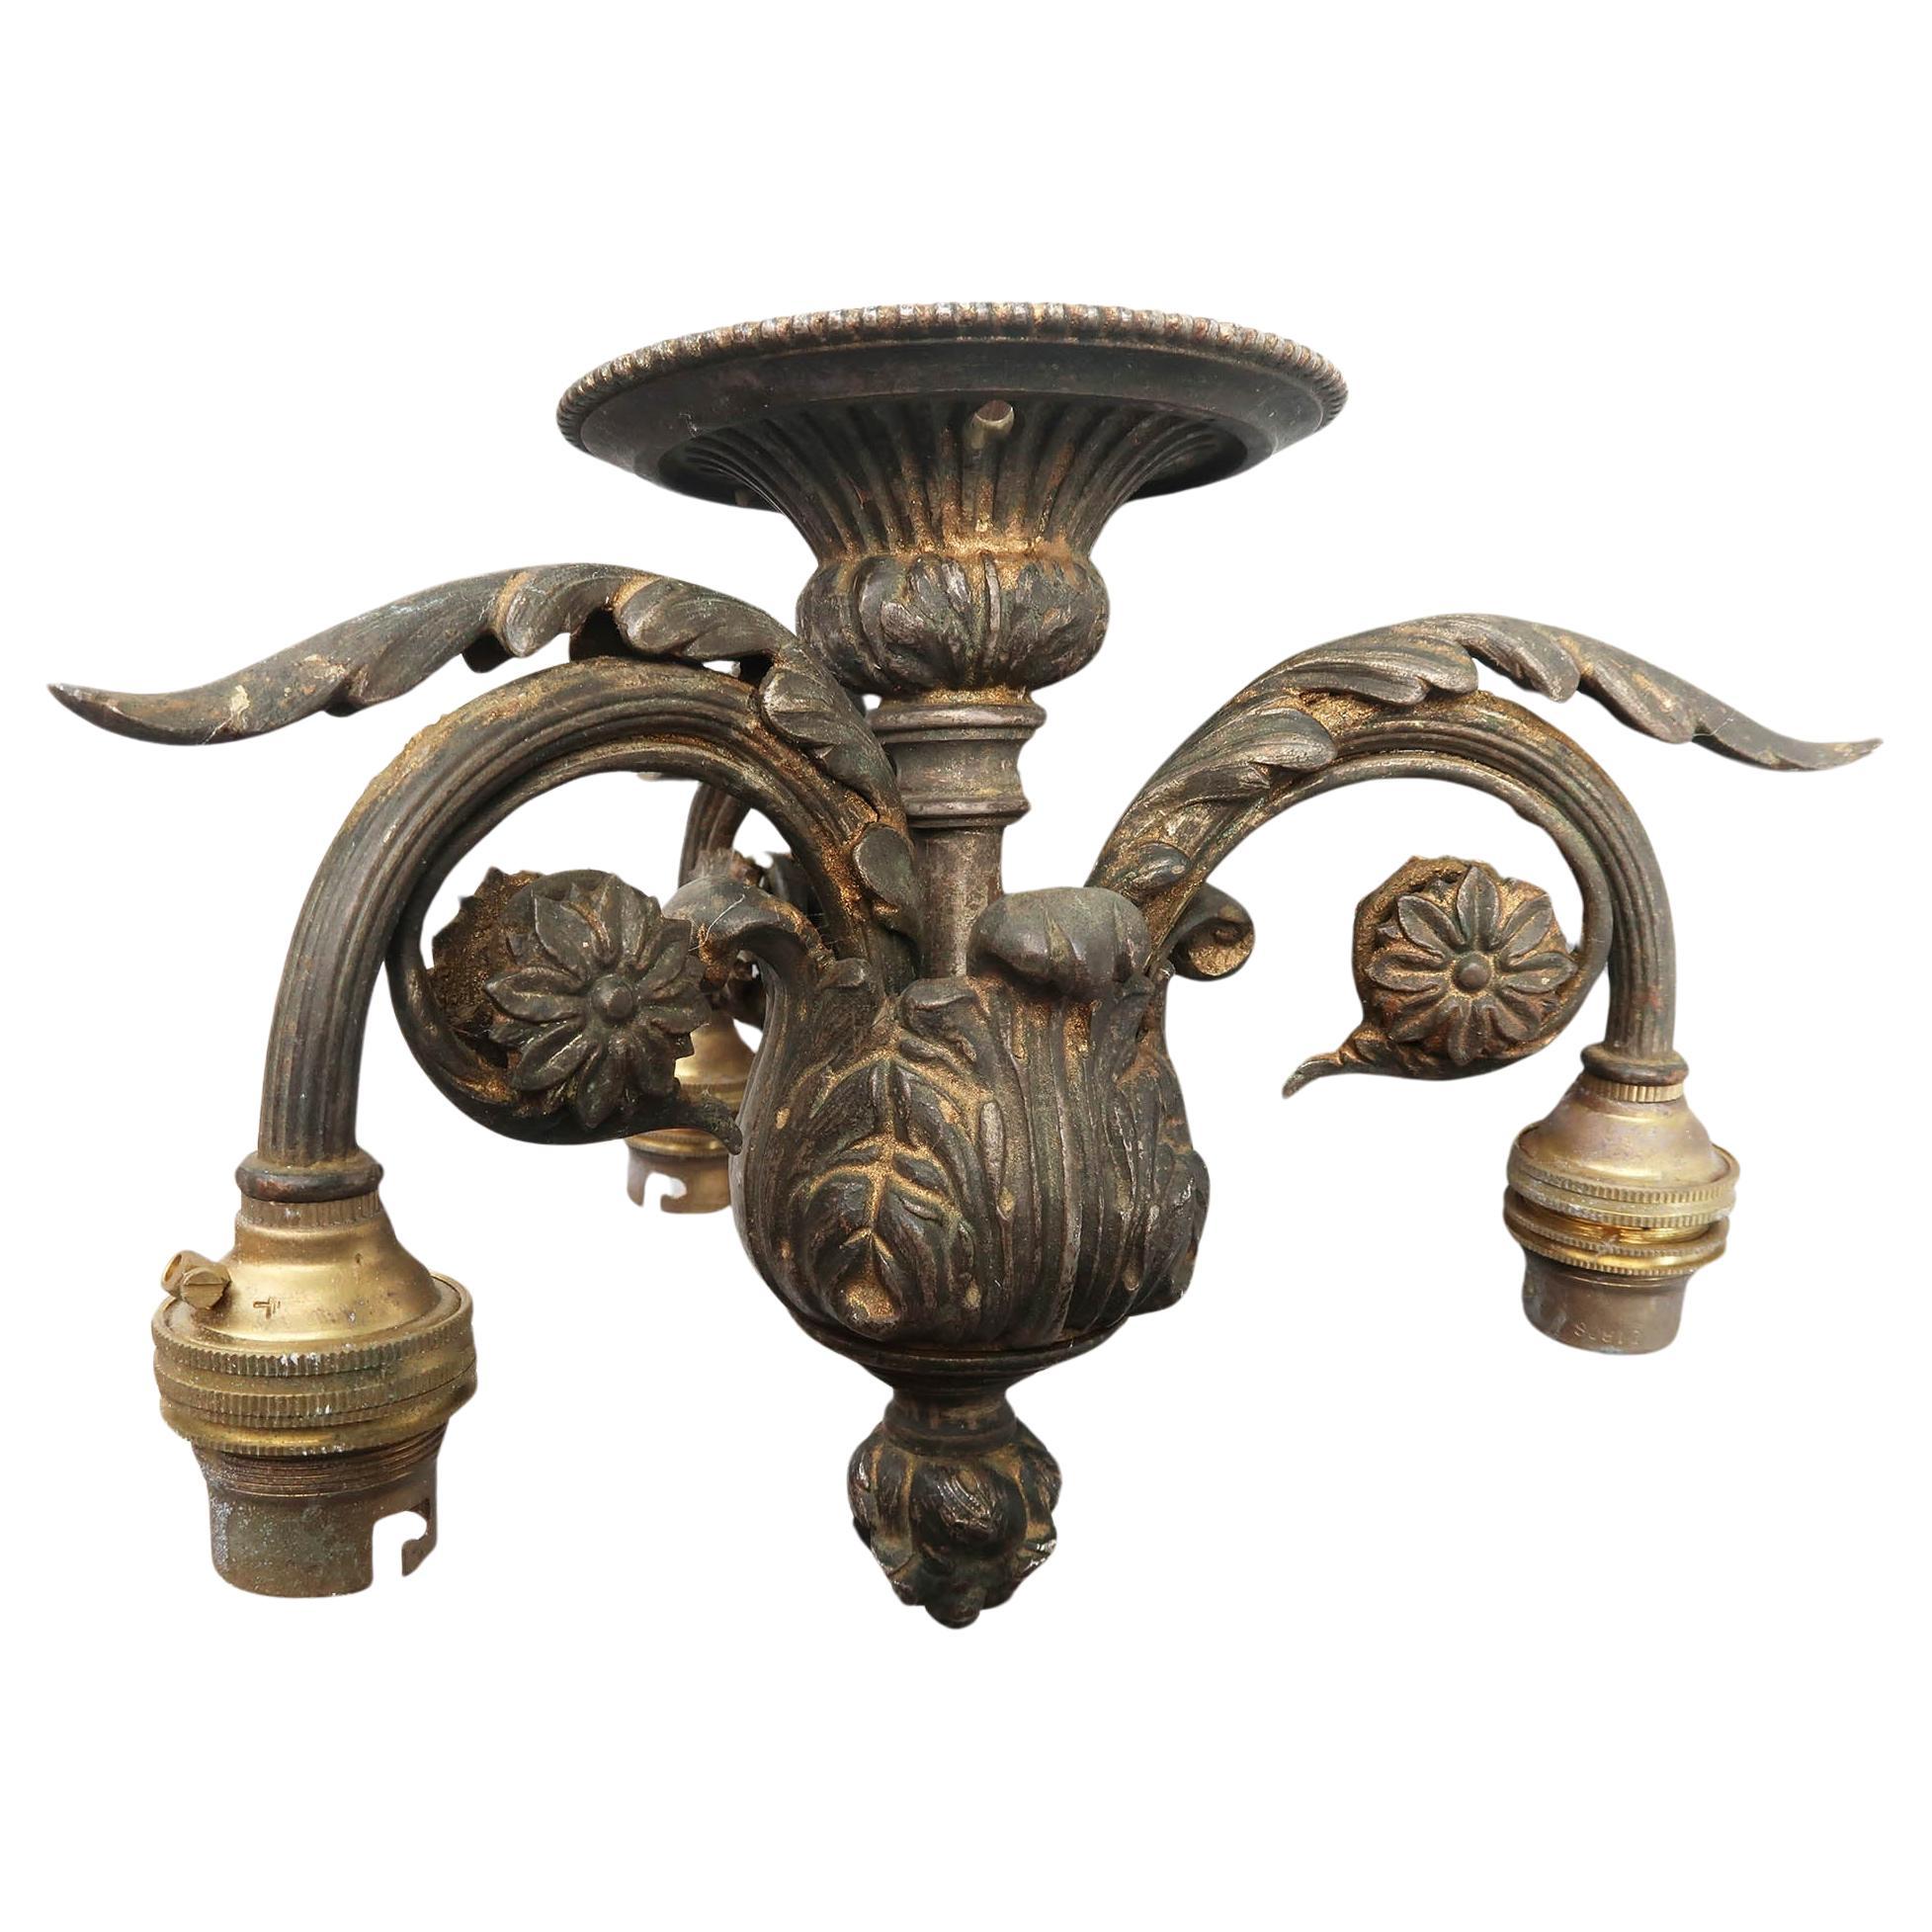 Antique Gilt Bronze Empire Style Ceiling Light Fitting. French, C.1900